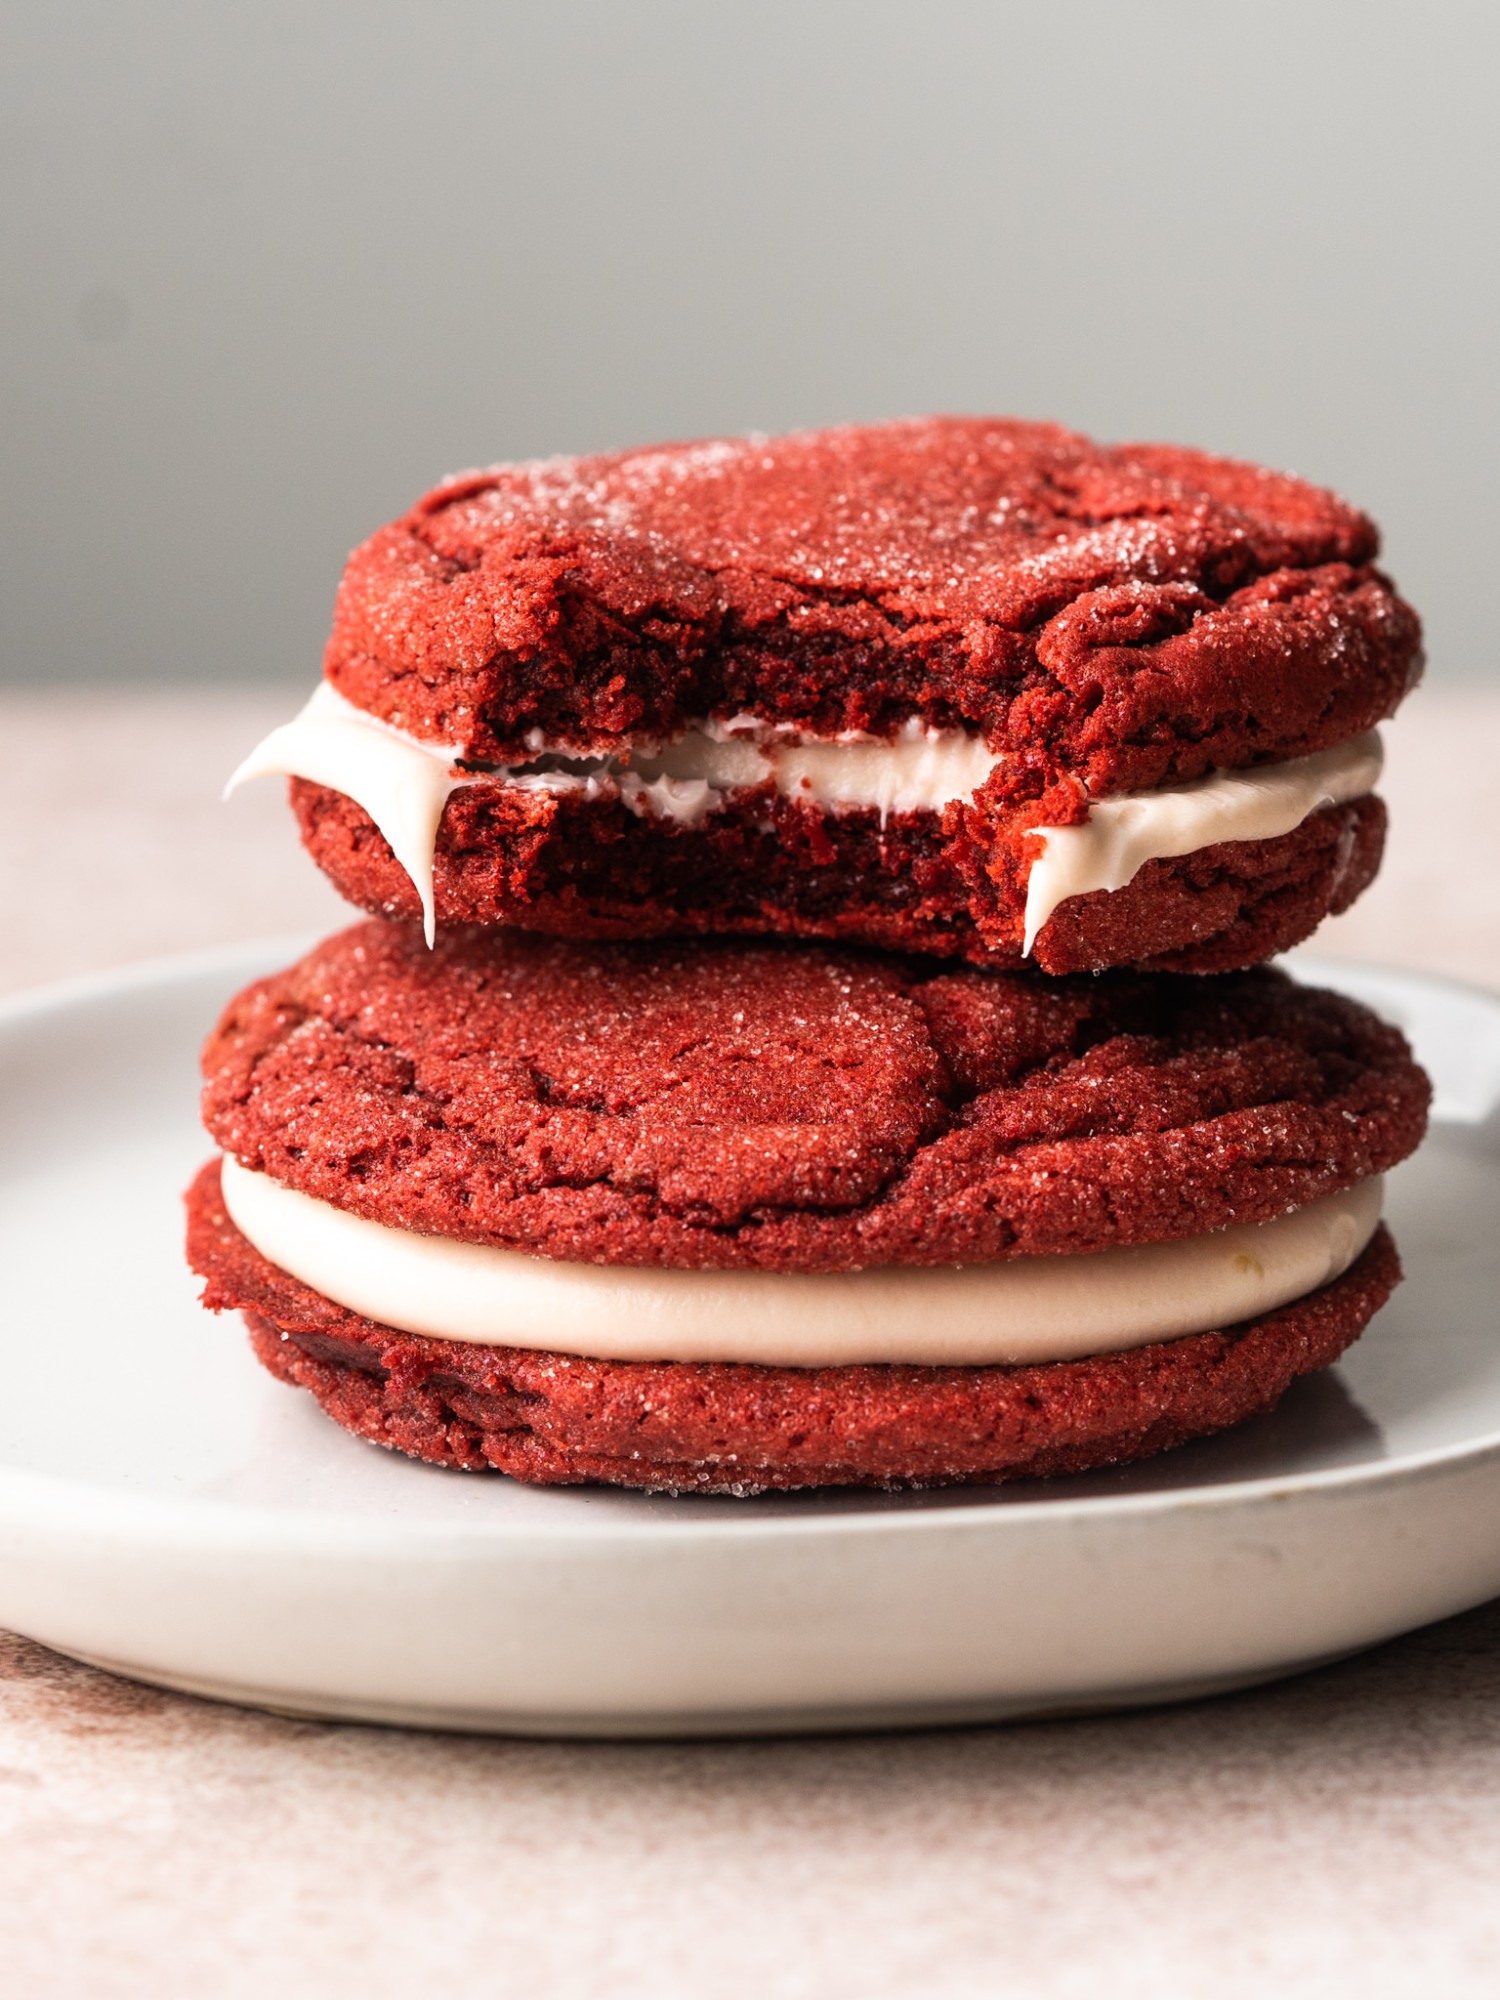 Side view of red velvet cake mix cookies on a serving plate